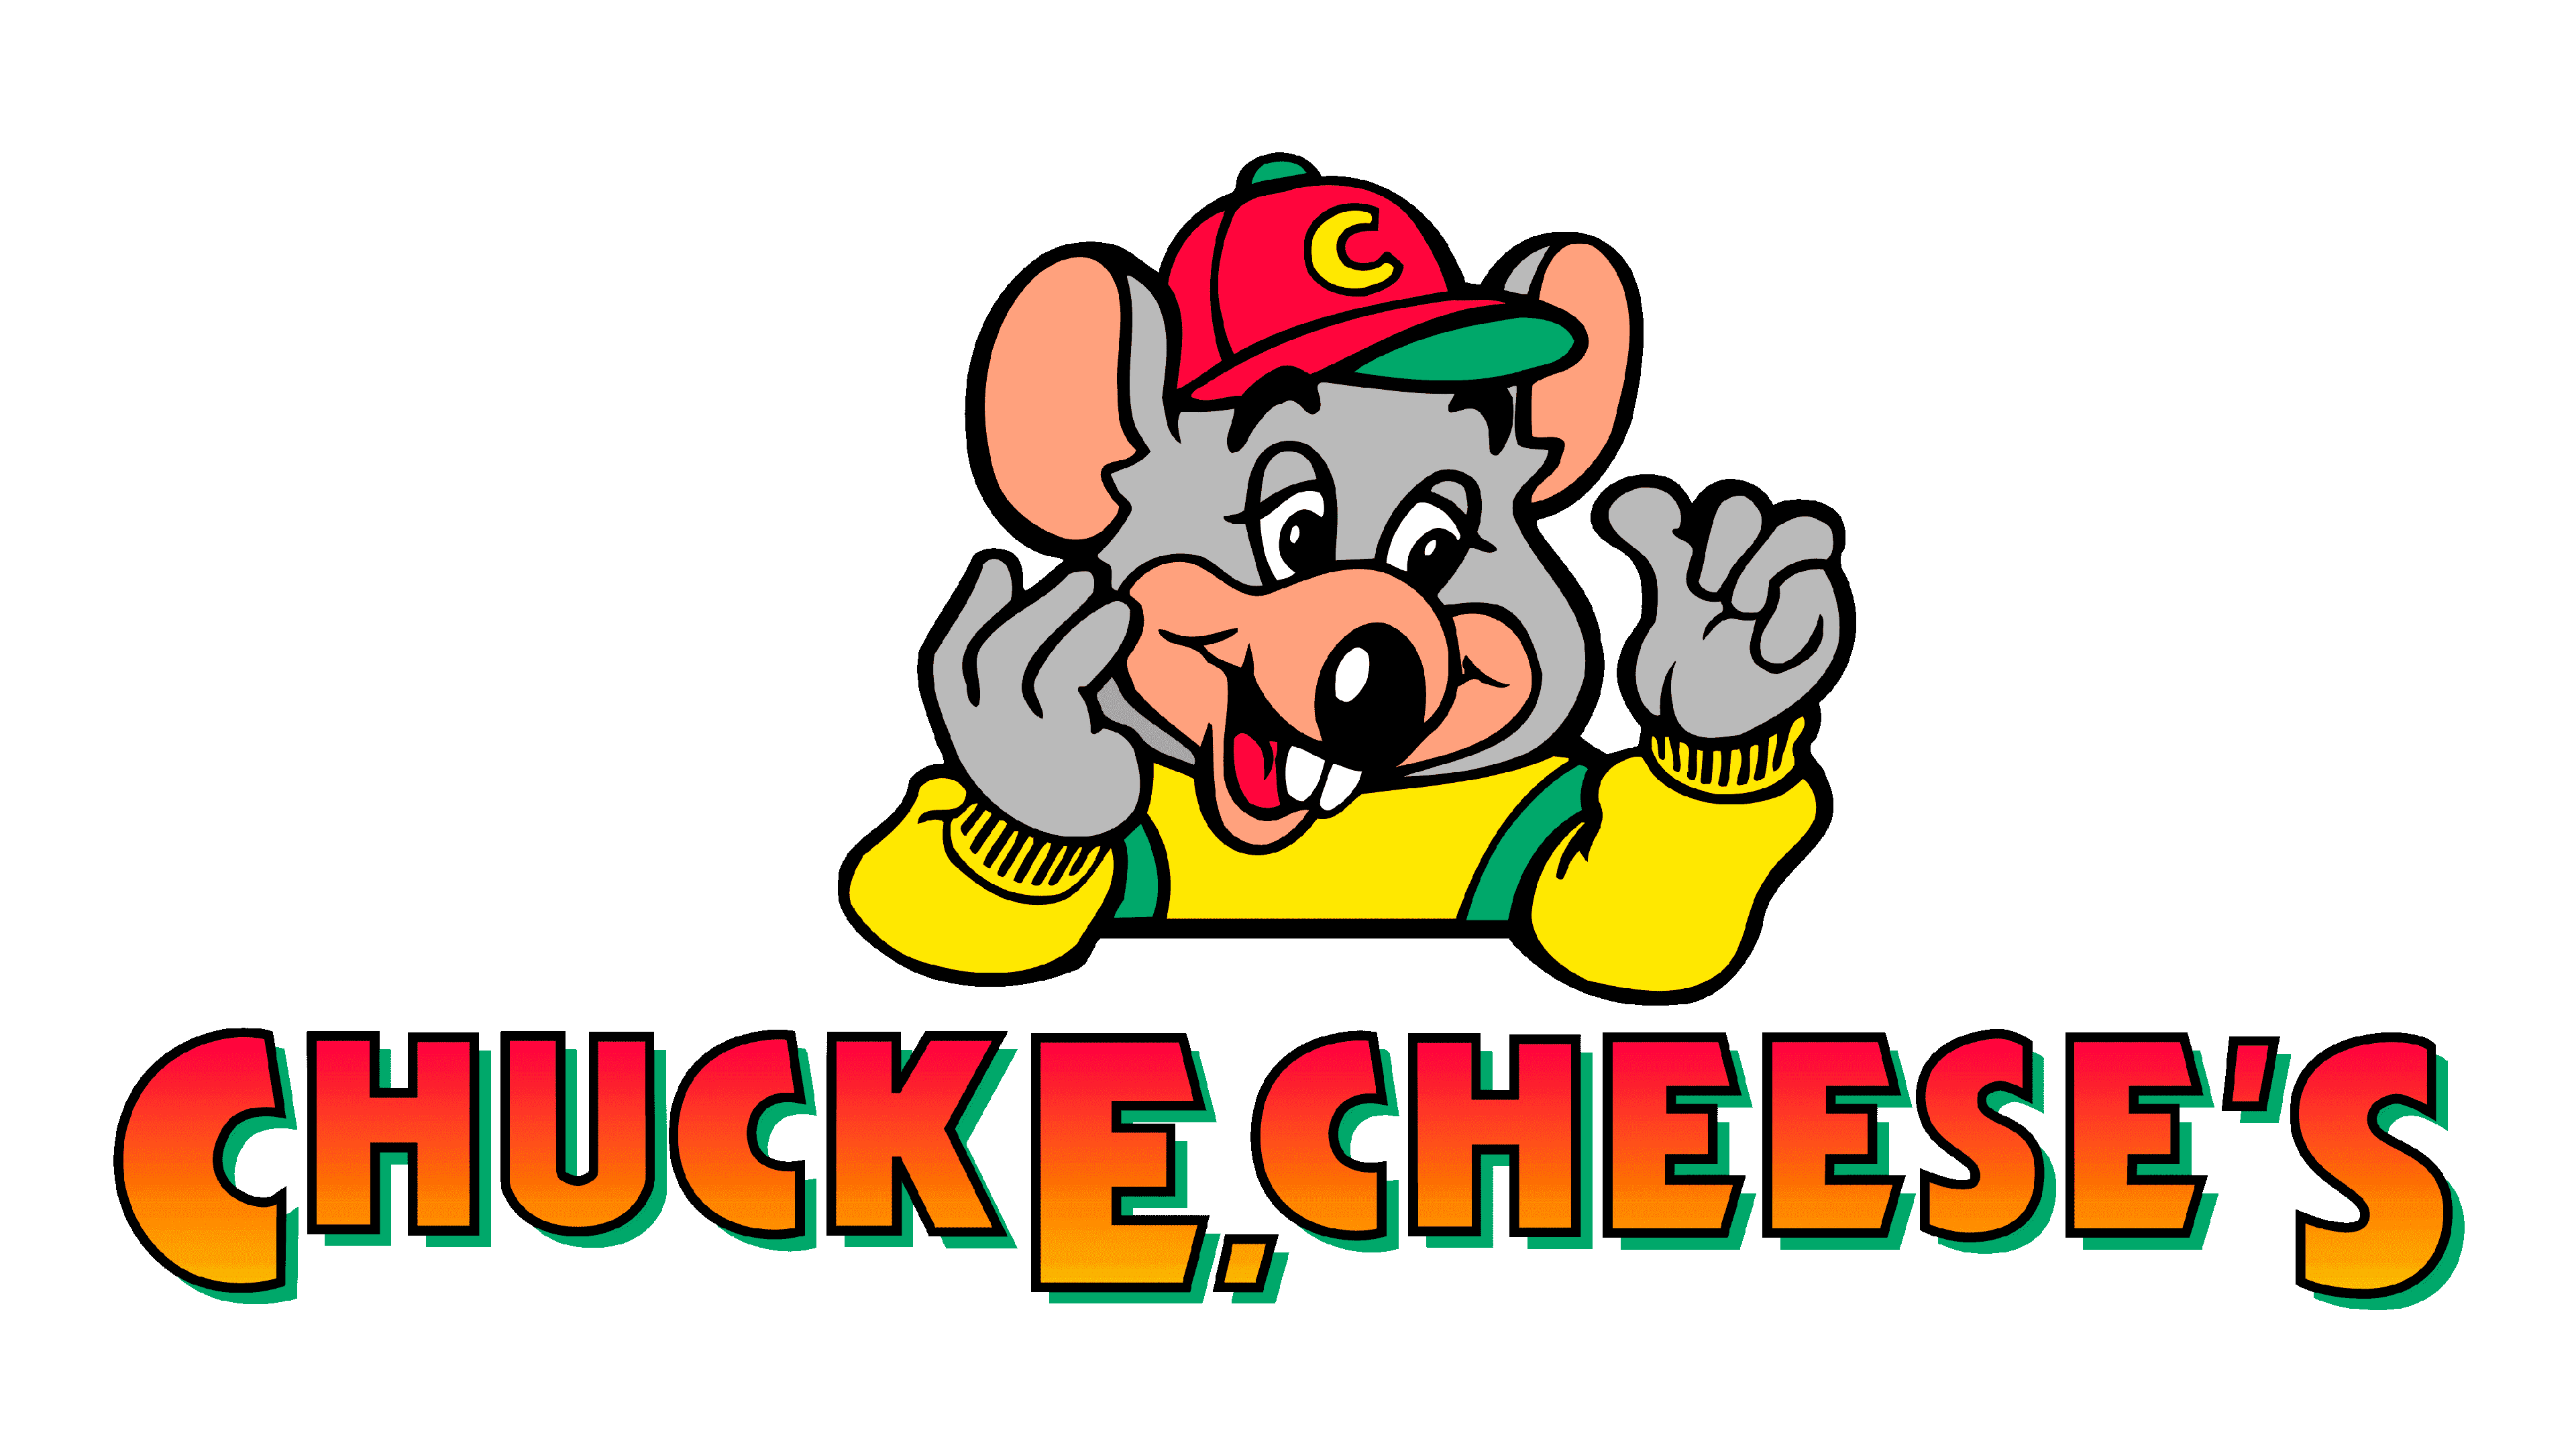 From Mouse To Star The Chuck E Cheese Logo History